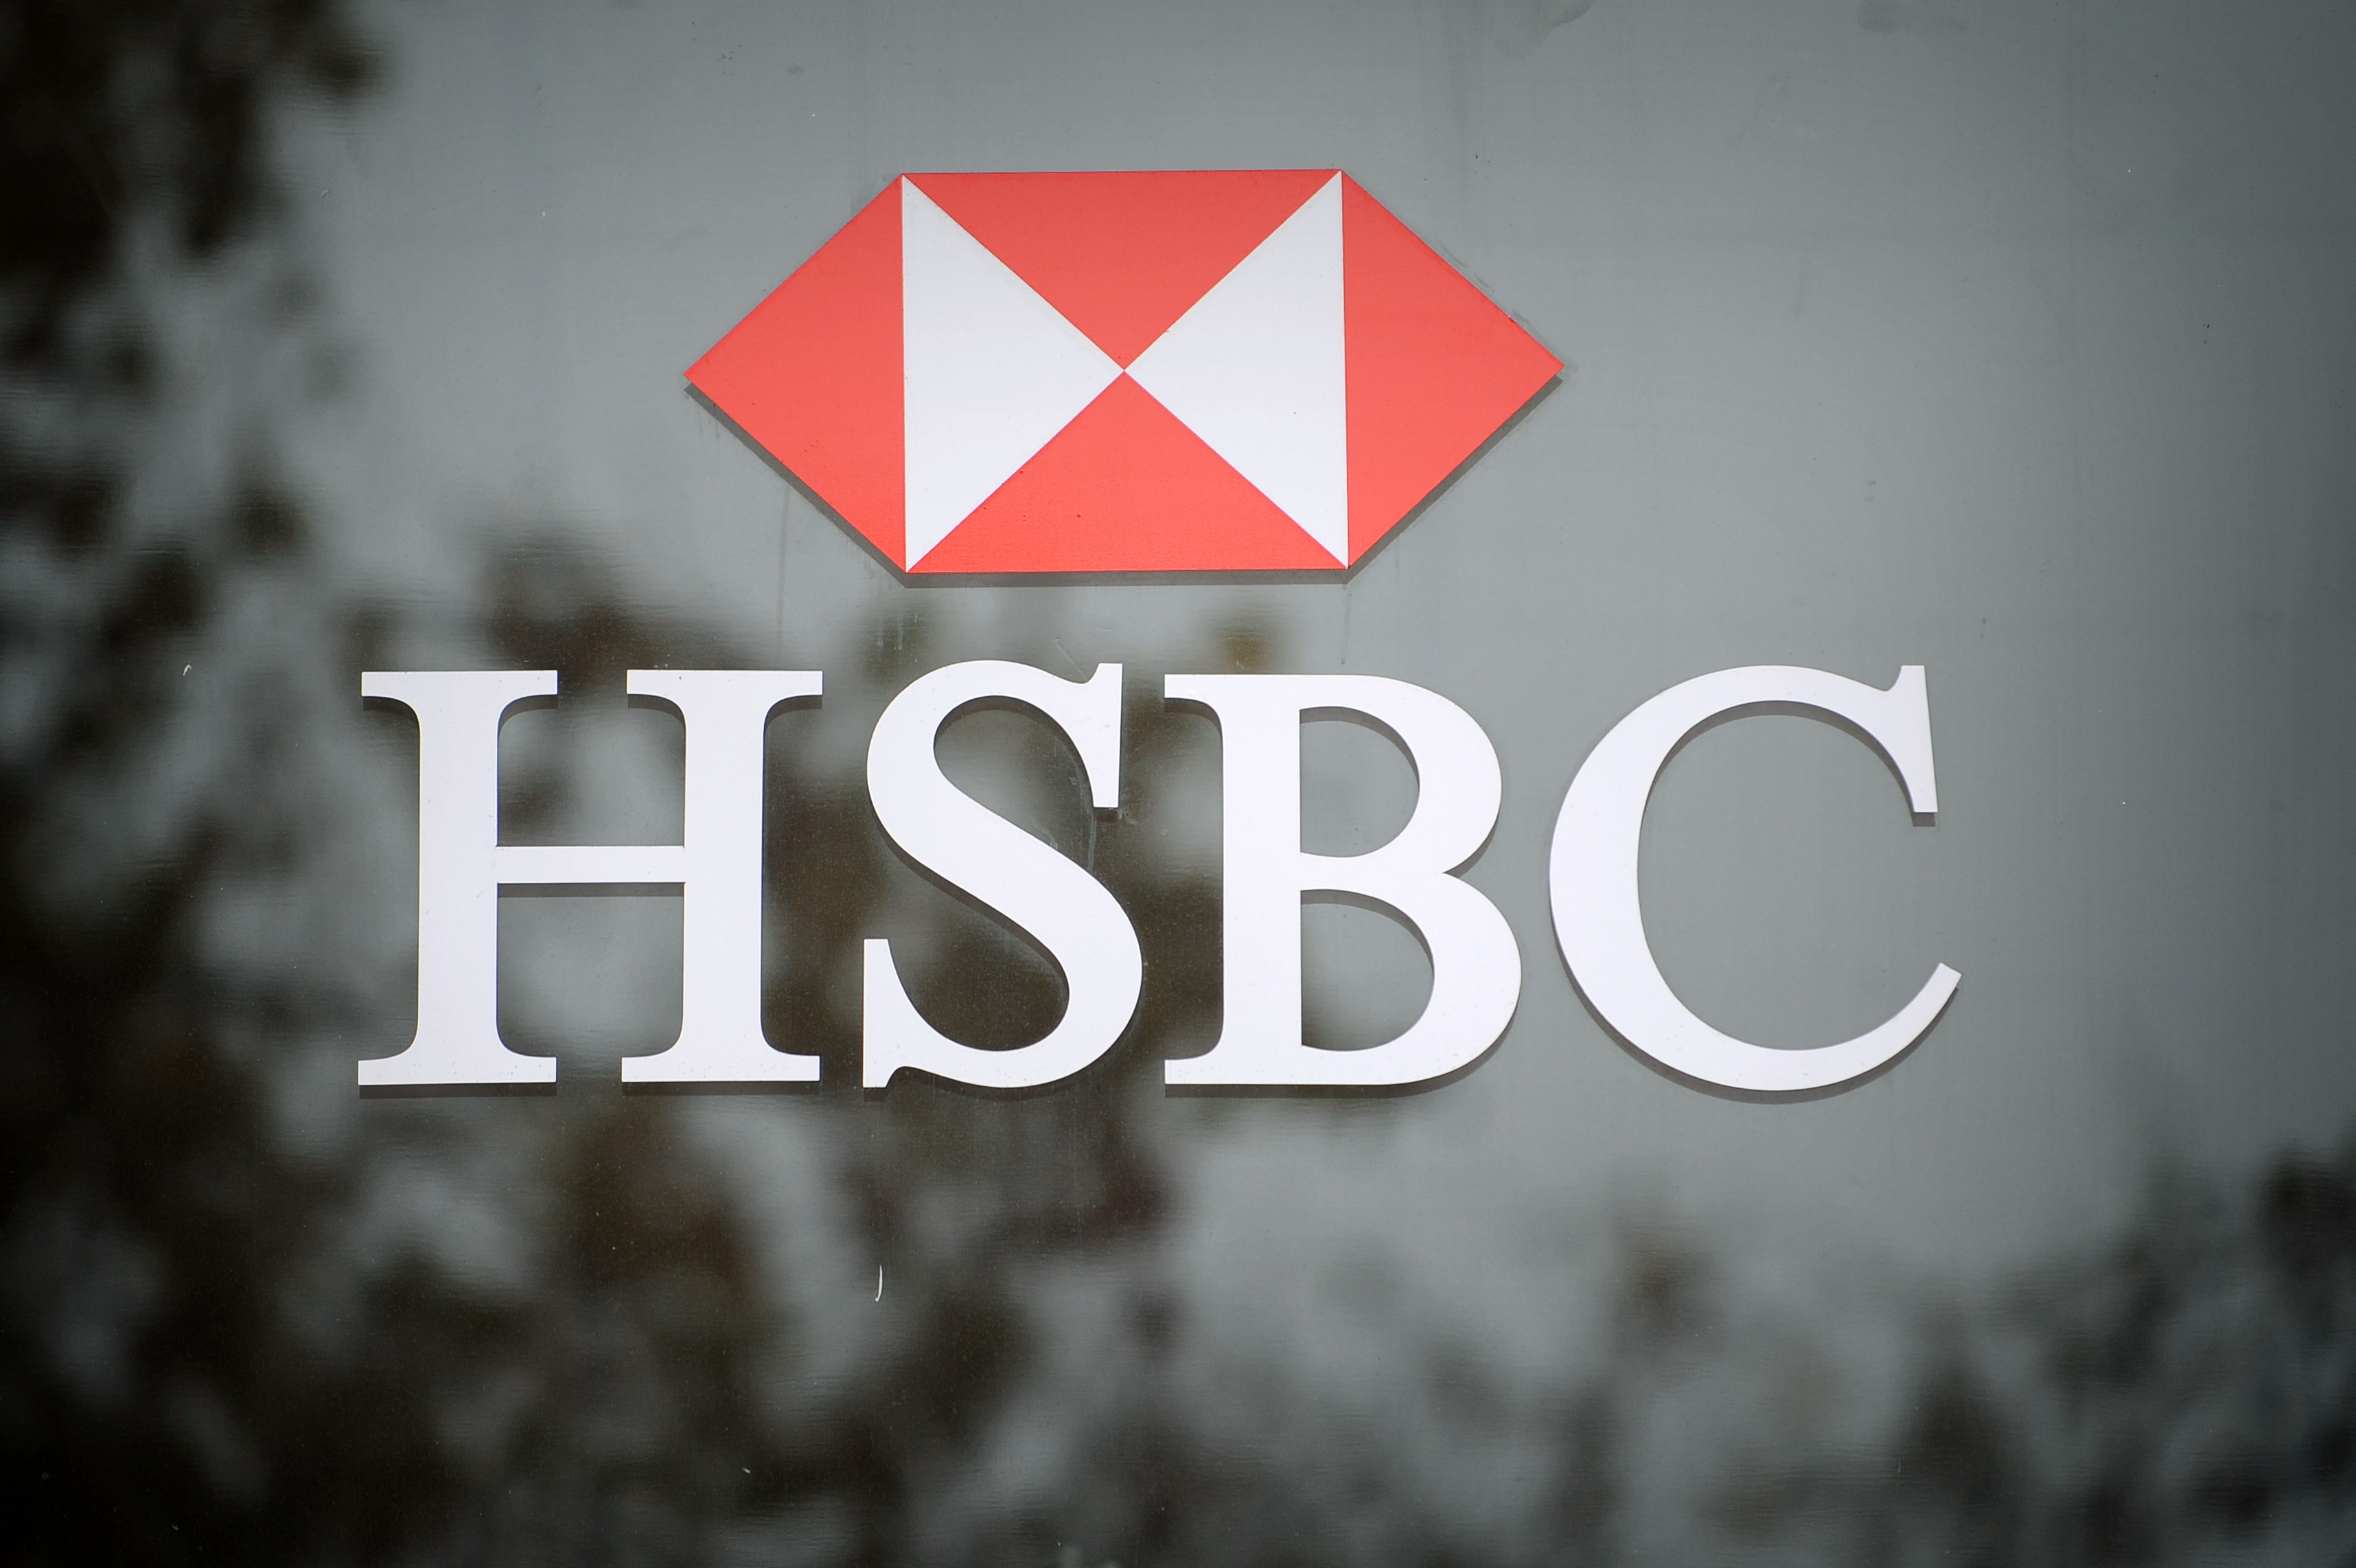 (FILES) This file photo taken on November 24, 2009 shows the logo of British banking giant HSBC in Paris. British banking giant HSBC is to pay more than $600 million to US authorities for its abusive mortgage lending and foreclosure practices in the housing market, officials said February 5, 2016. / AFP / LIONEL BONAVENTURE